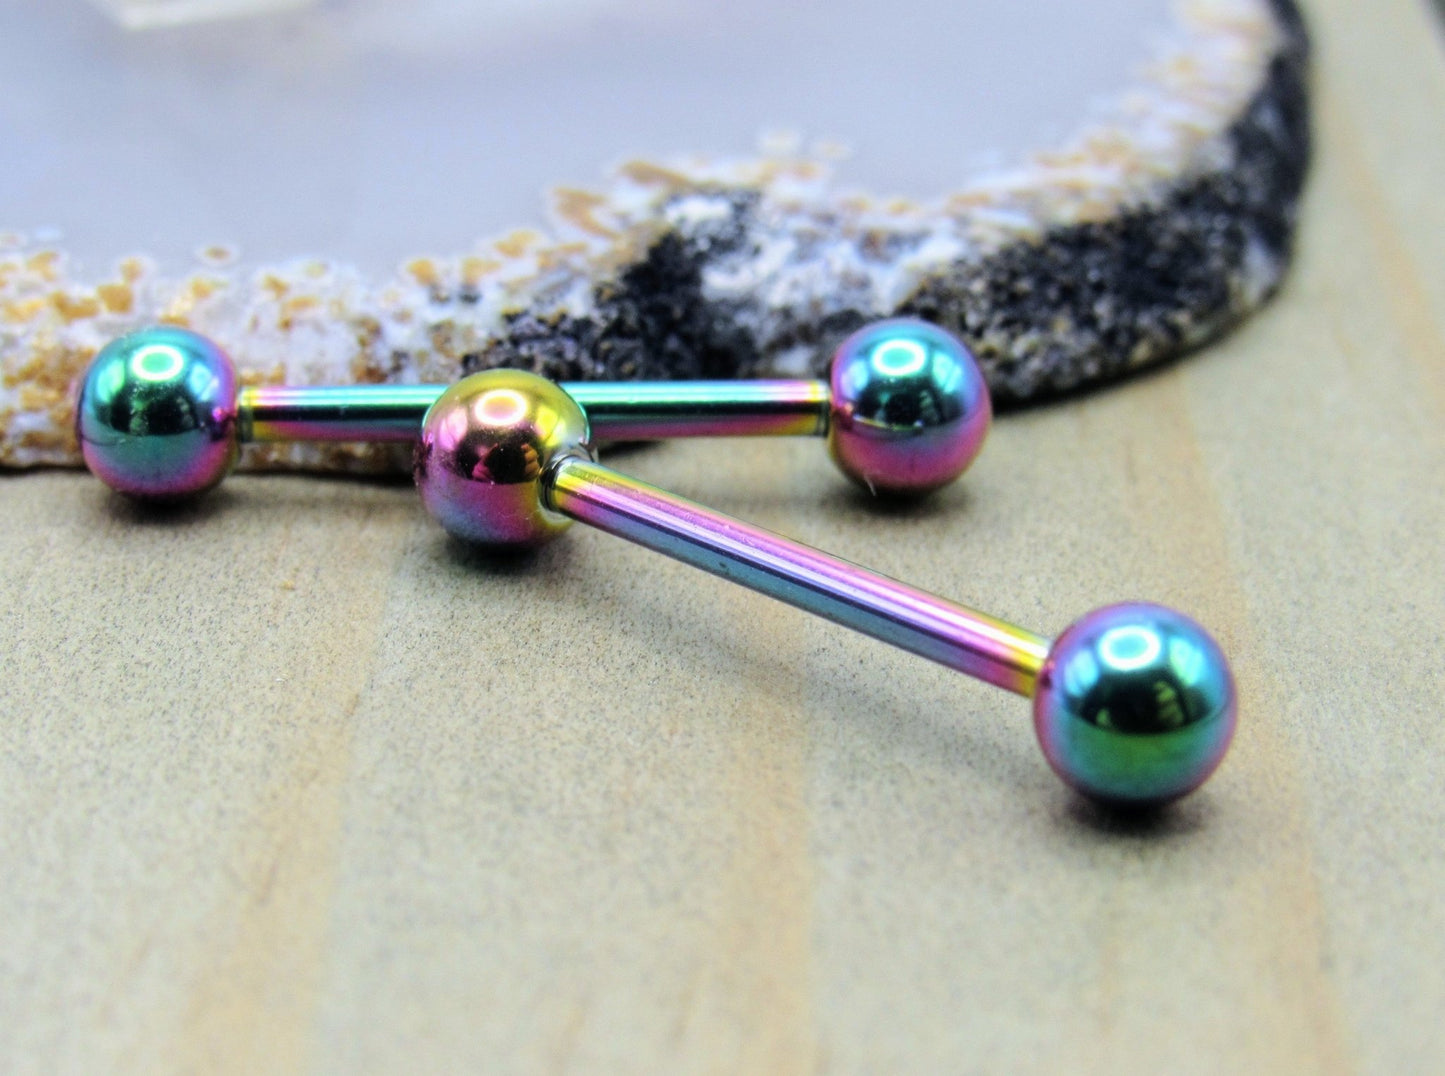 Rainbow nipple piercing rings 14g 5/8" stainless steel straight bars 5mm ball ends - Siren Body Jewelry